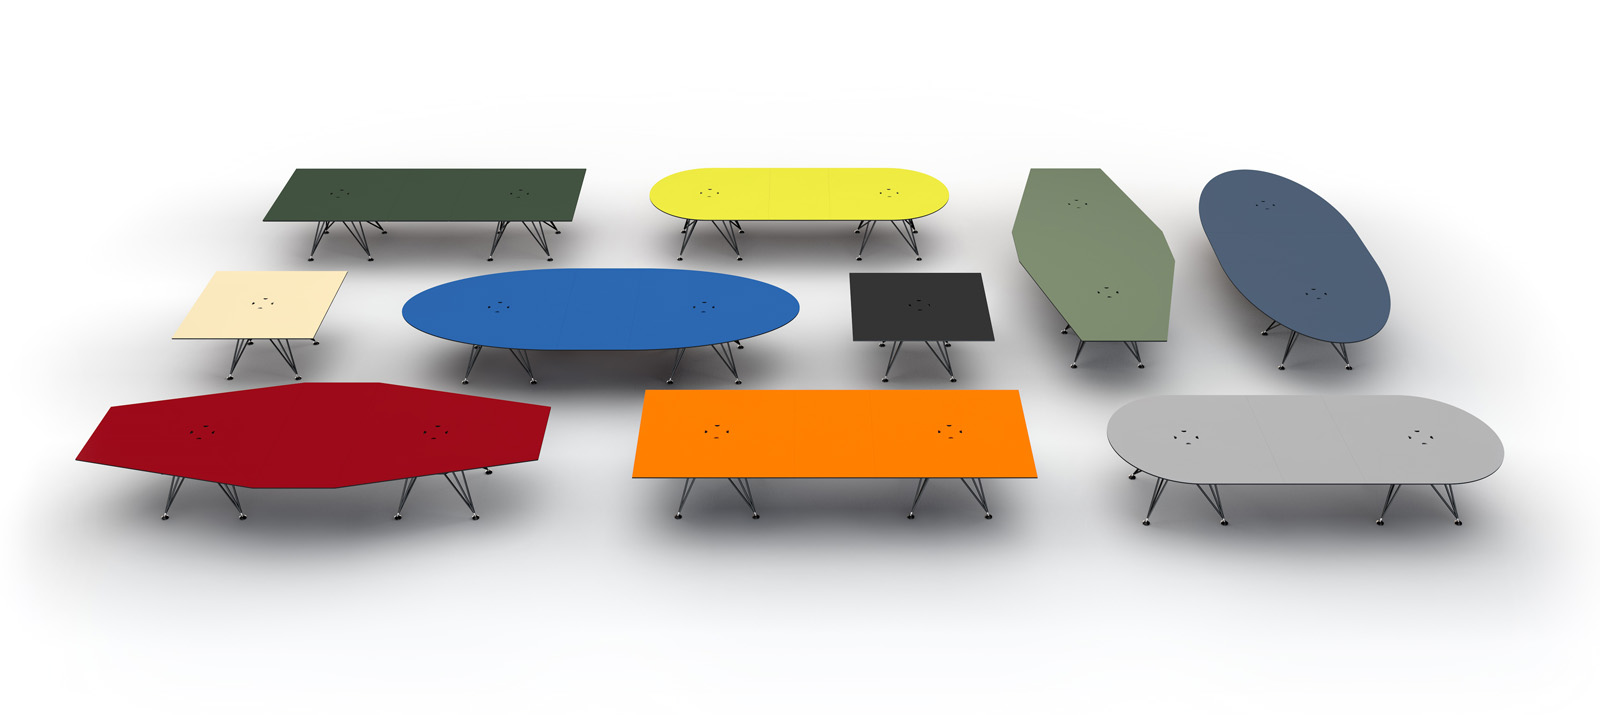 IONDESIGN TAKEOFF product design conference table system 